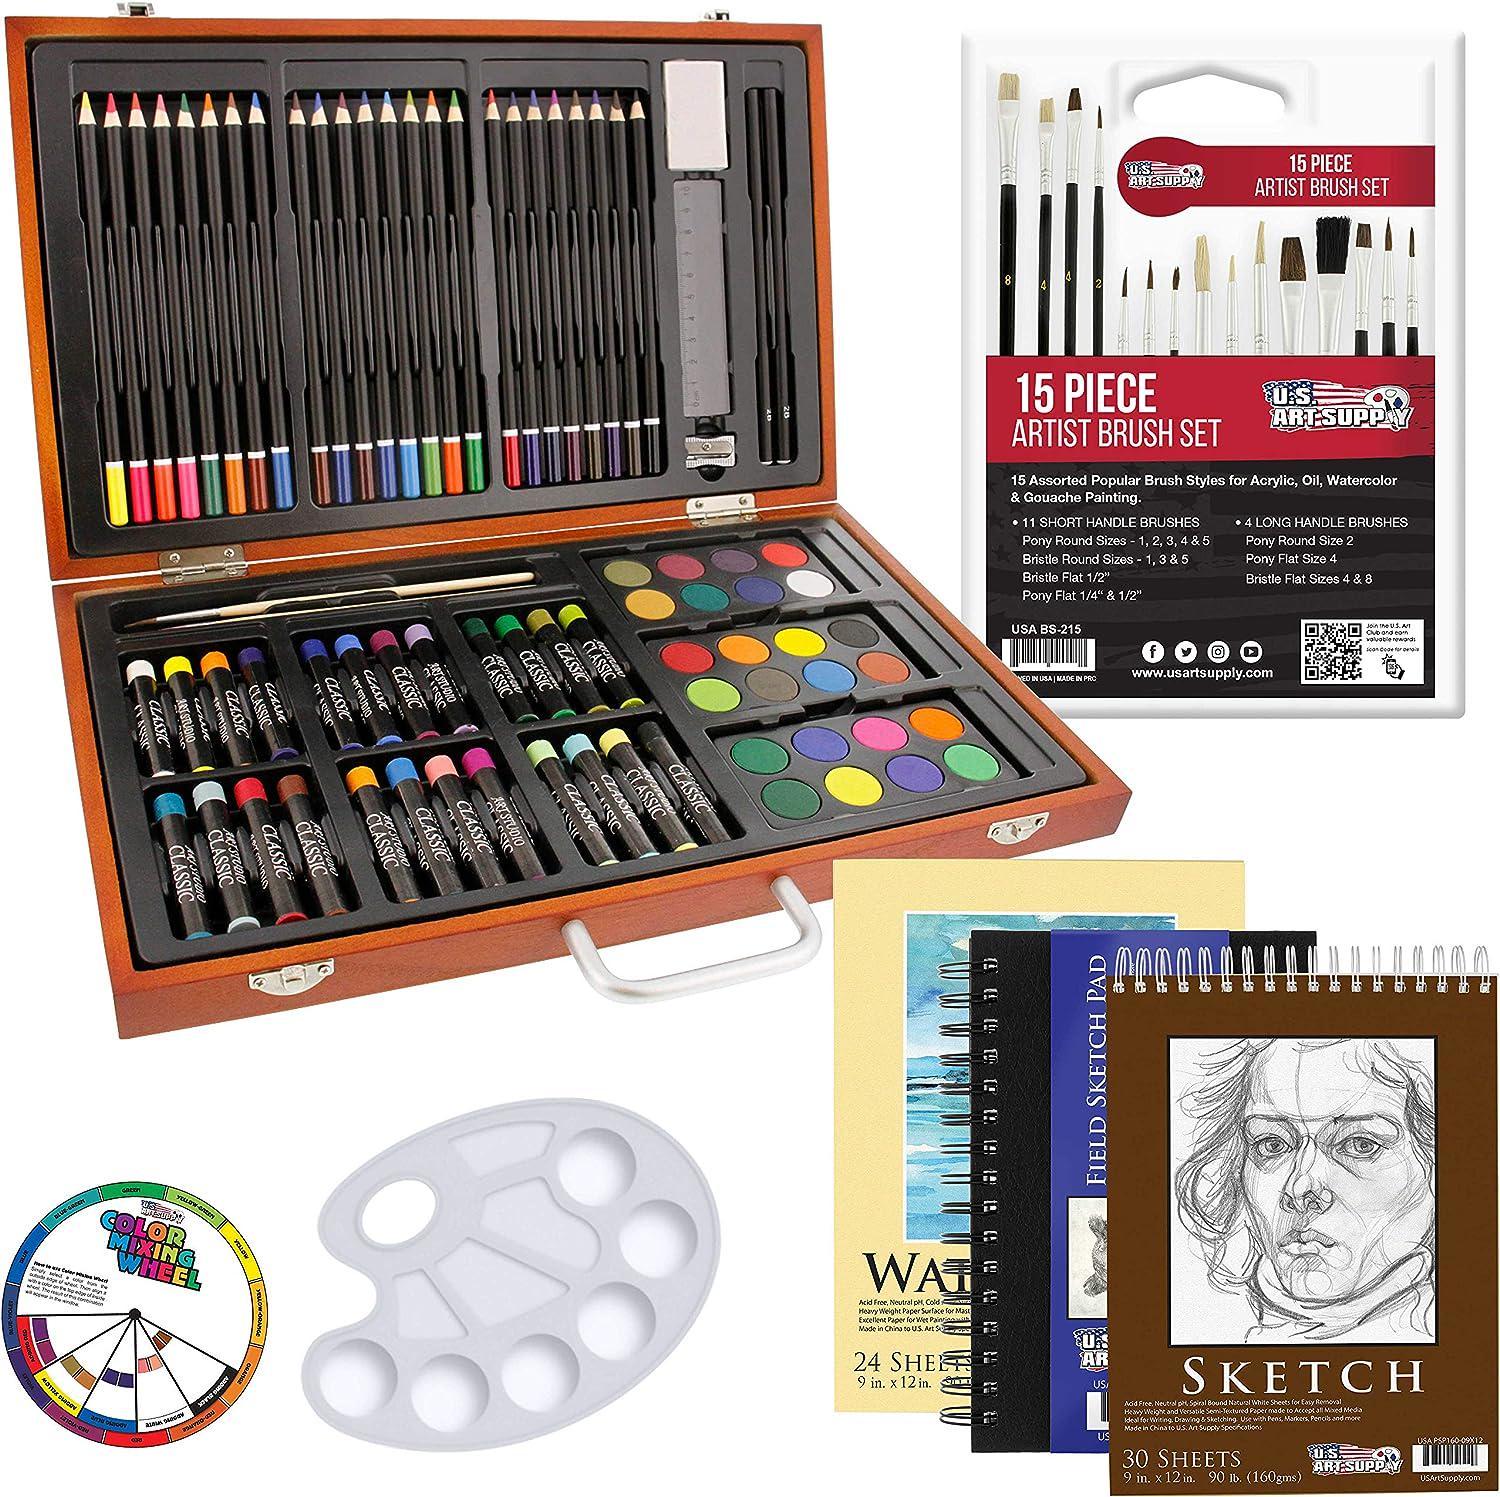 Deluxe Artist Painting Set with Aluminum and Solid Beech Wood Easel, 48  Acrylic, 24 Watercolor, 10 Canvases, 30 Brushes, Sketch Pad & More